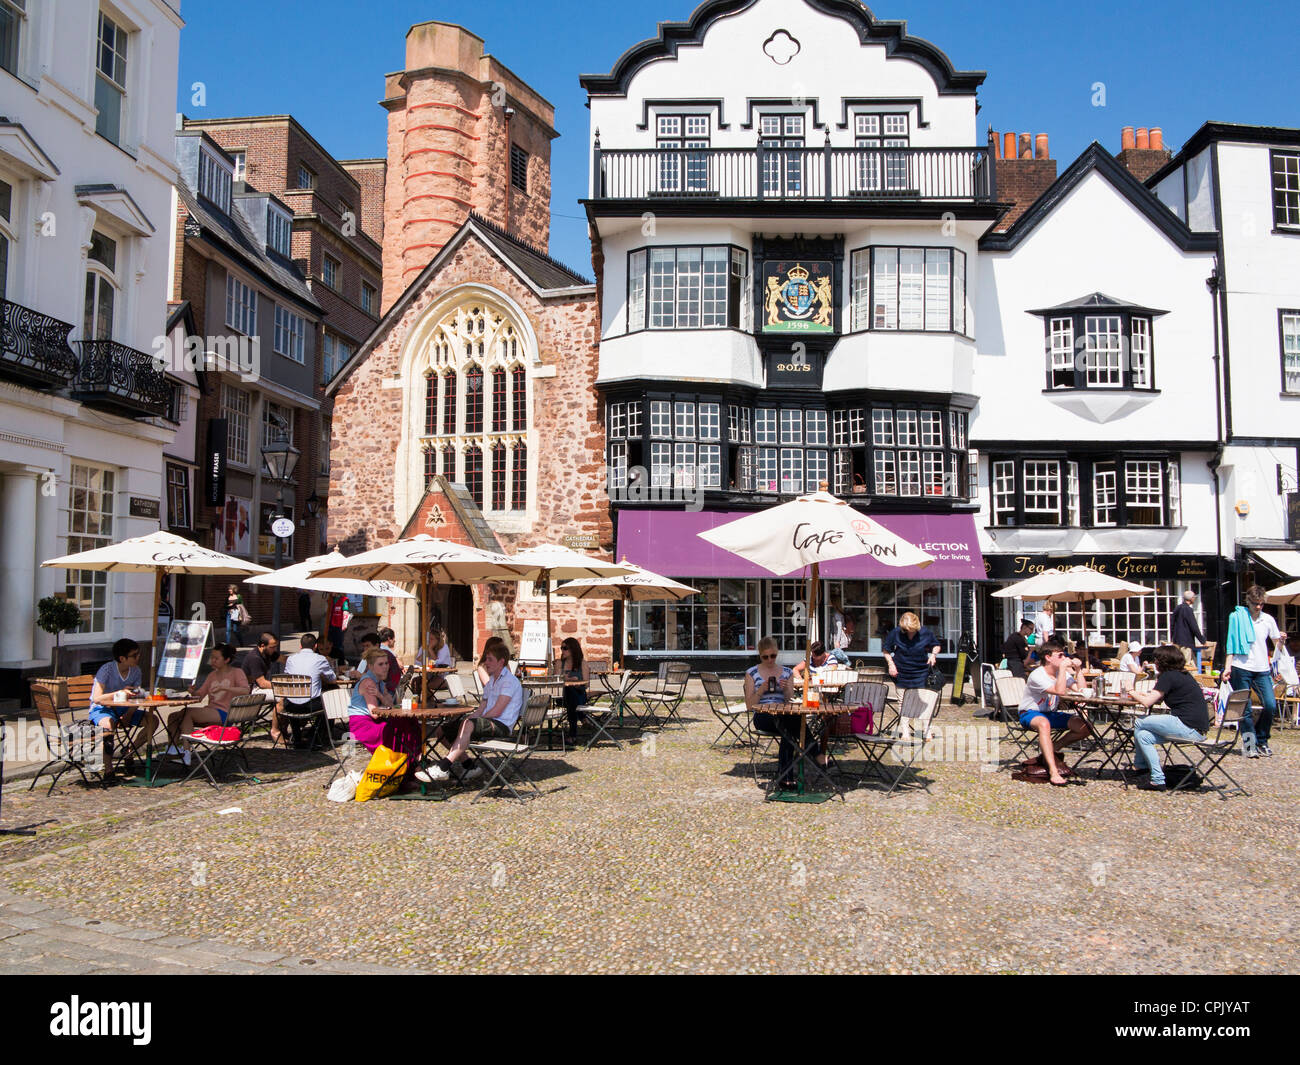 Exeter Cathedral Yard showing Mol's Coffee House and outdoor cafe seating Stock Photo